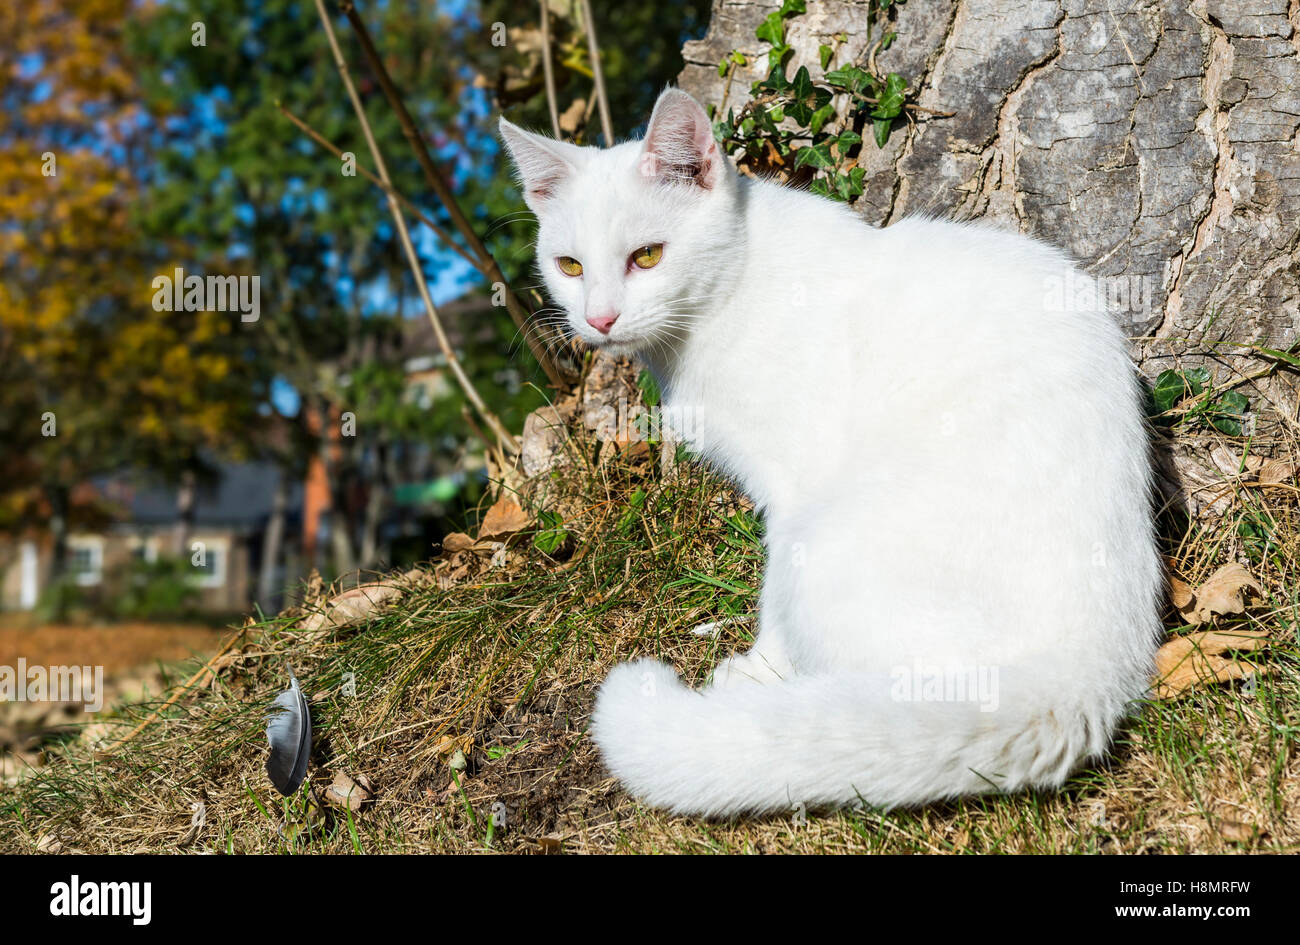 White cat. Pure white domestic cat with green eyes sitting on grass by a tree. Stock Photo